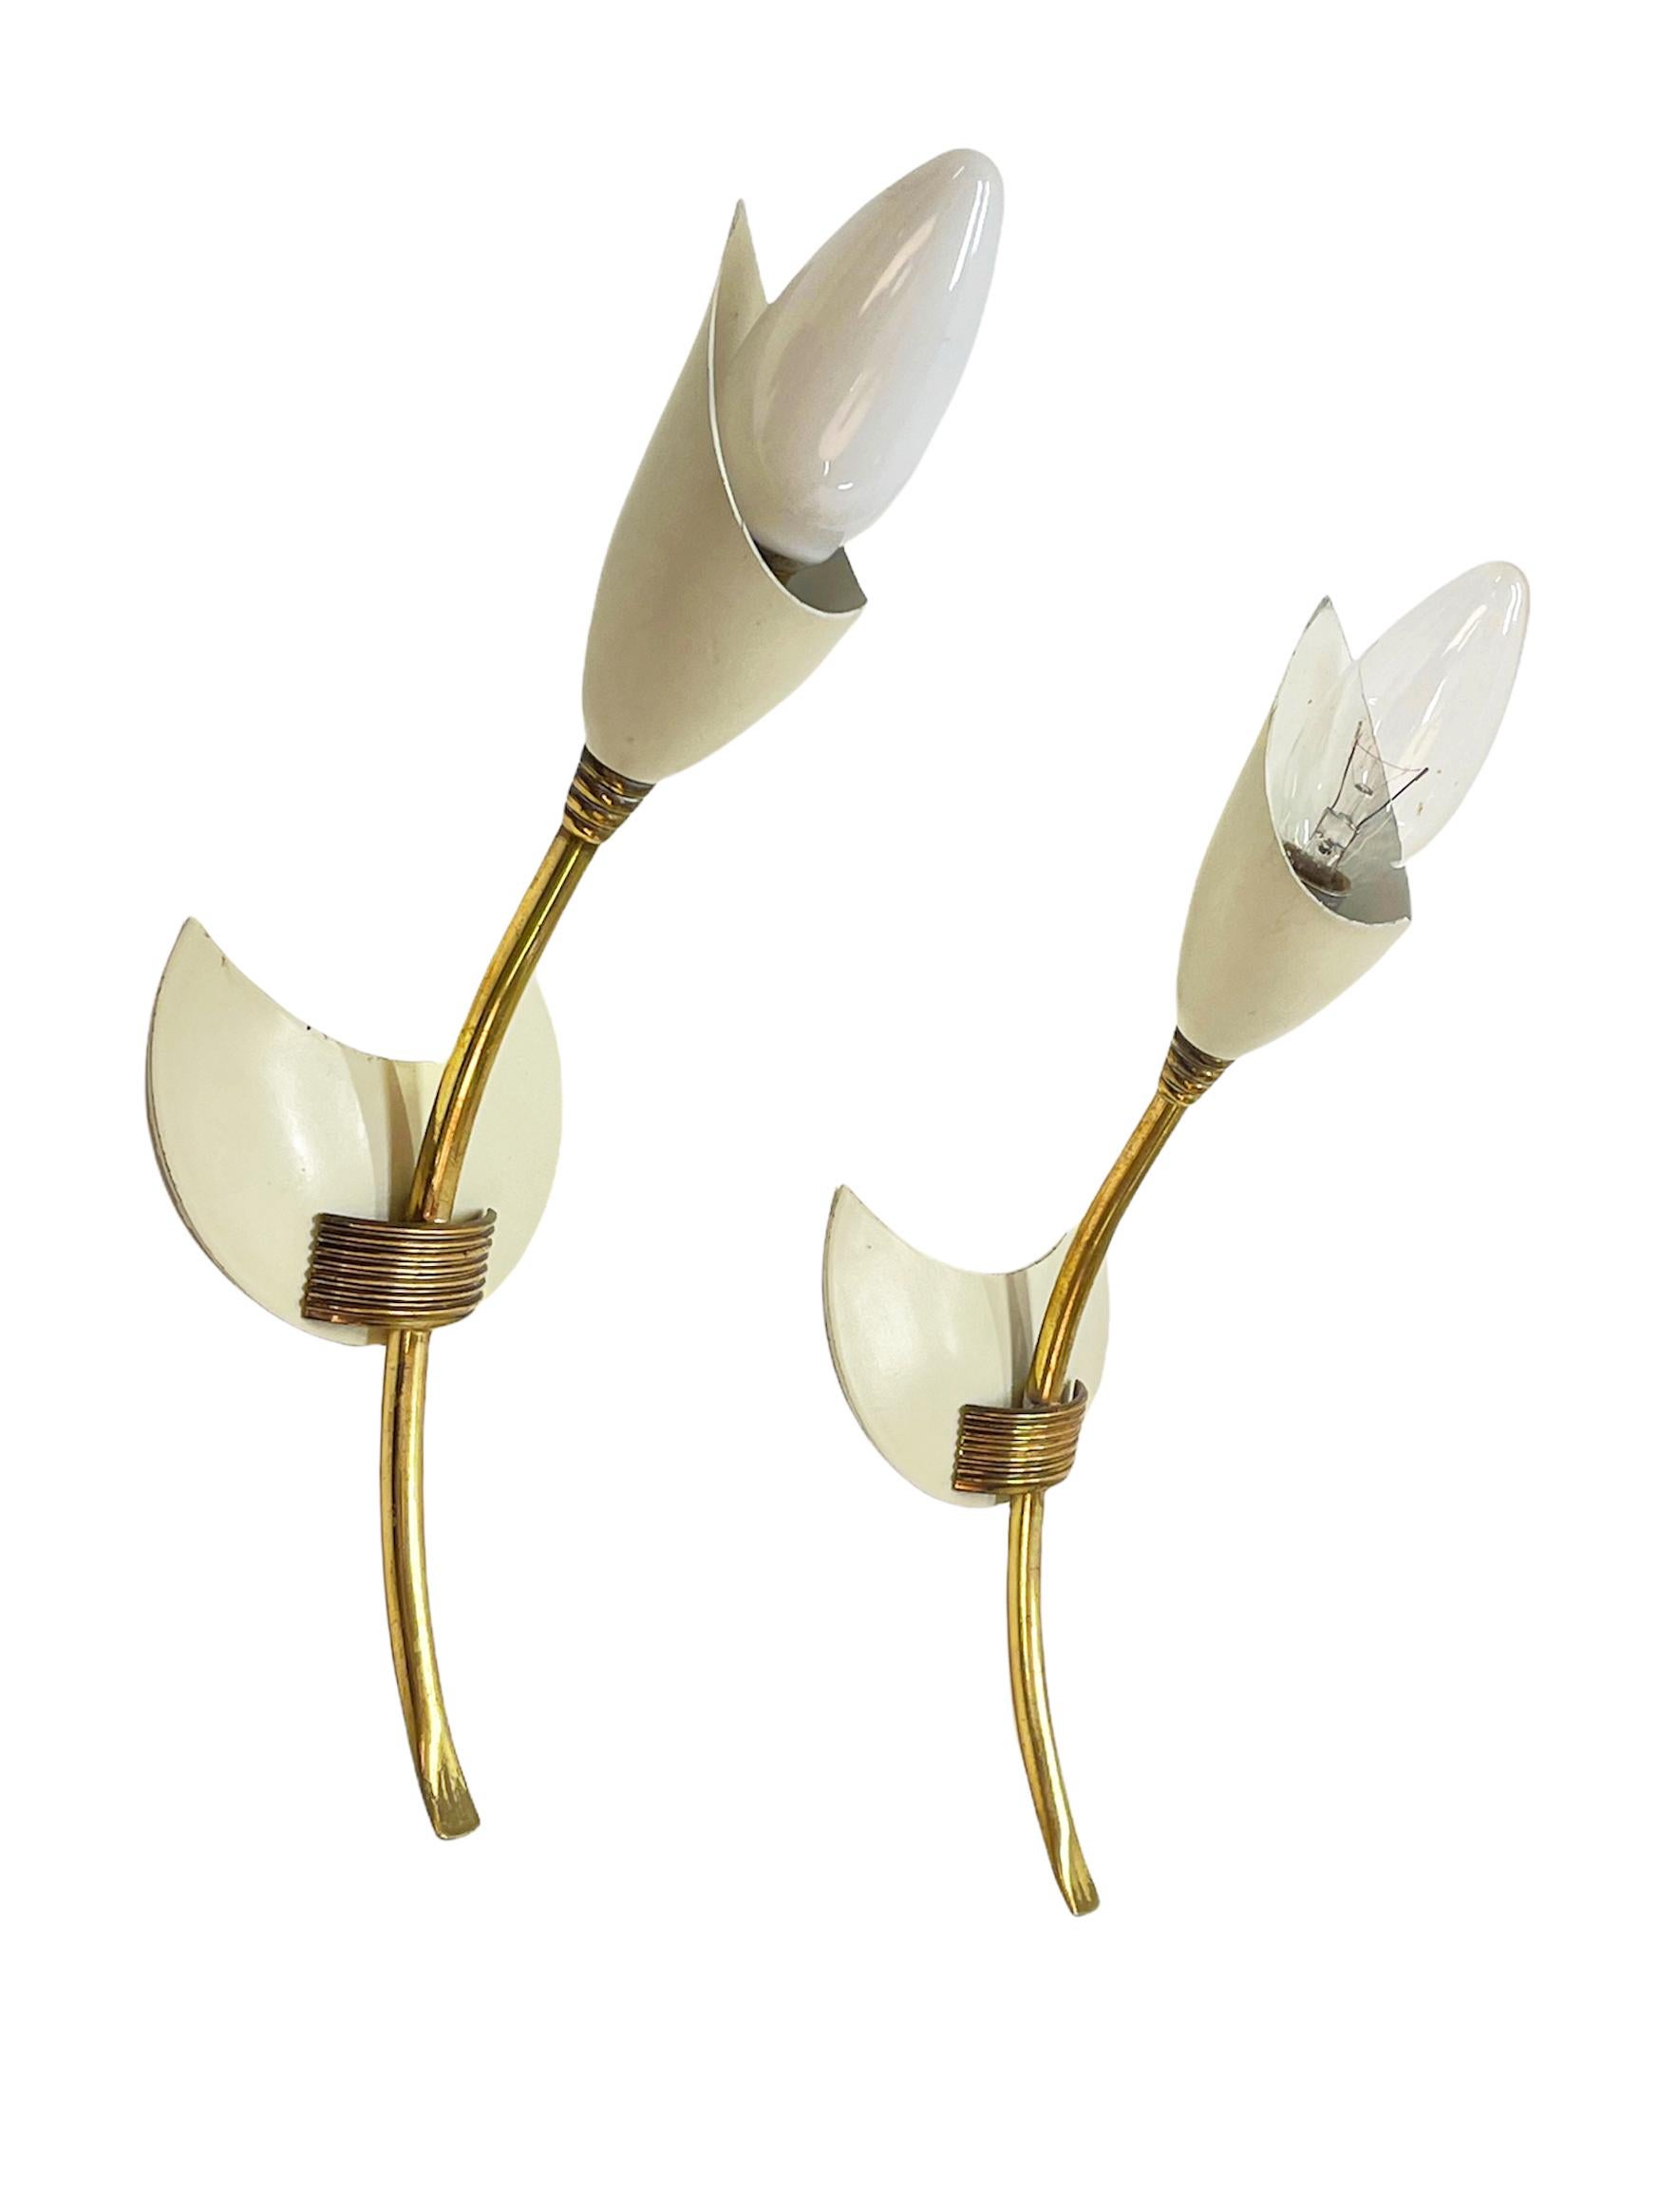 Pair of GCME Midcentury Brass and Enamelled Aluminum Italian Tulip Sconces 1950s For Sale 3